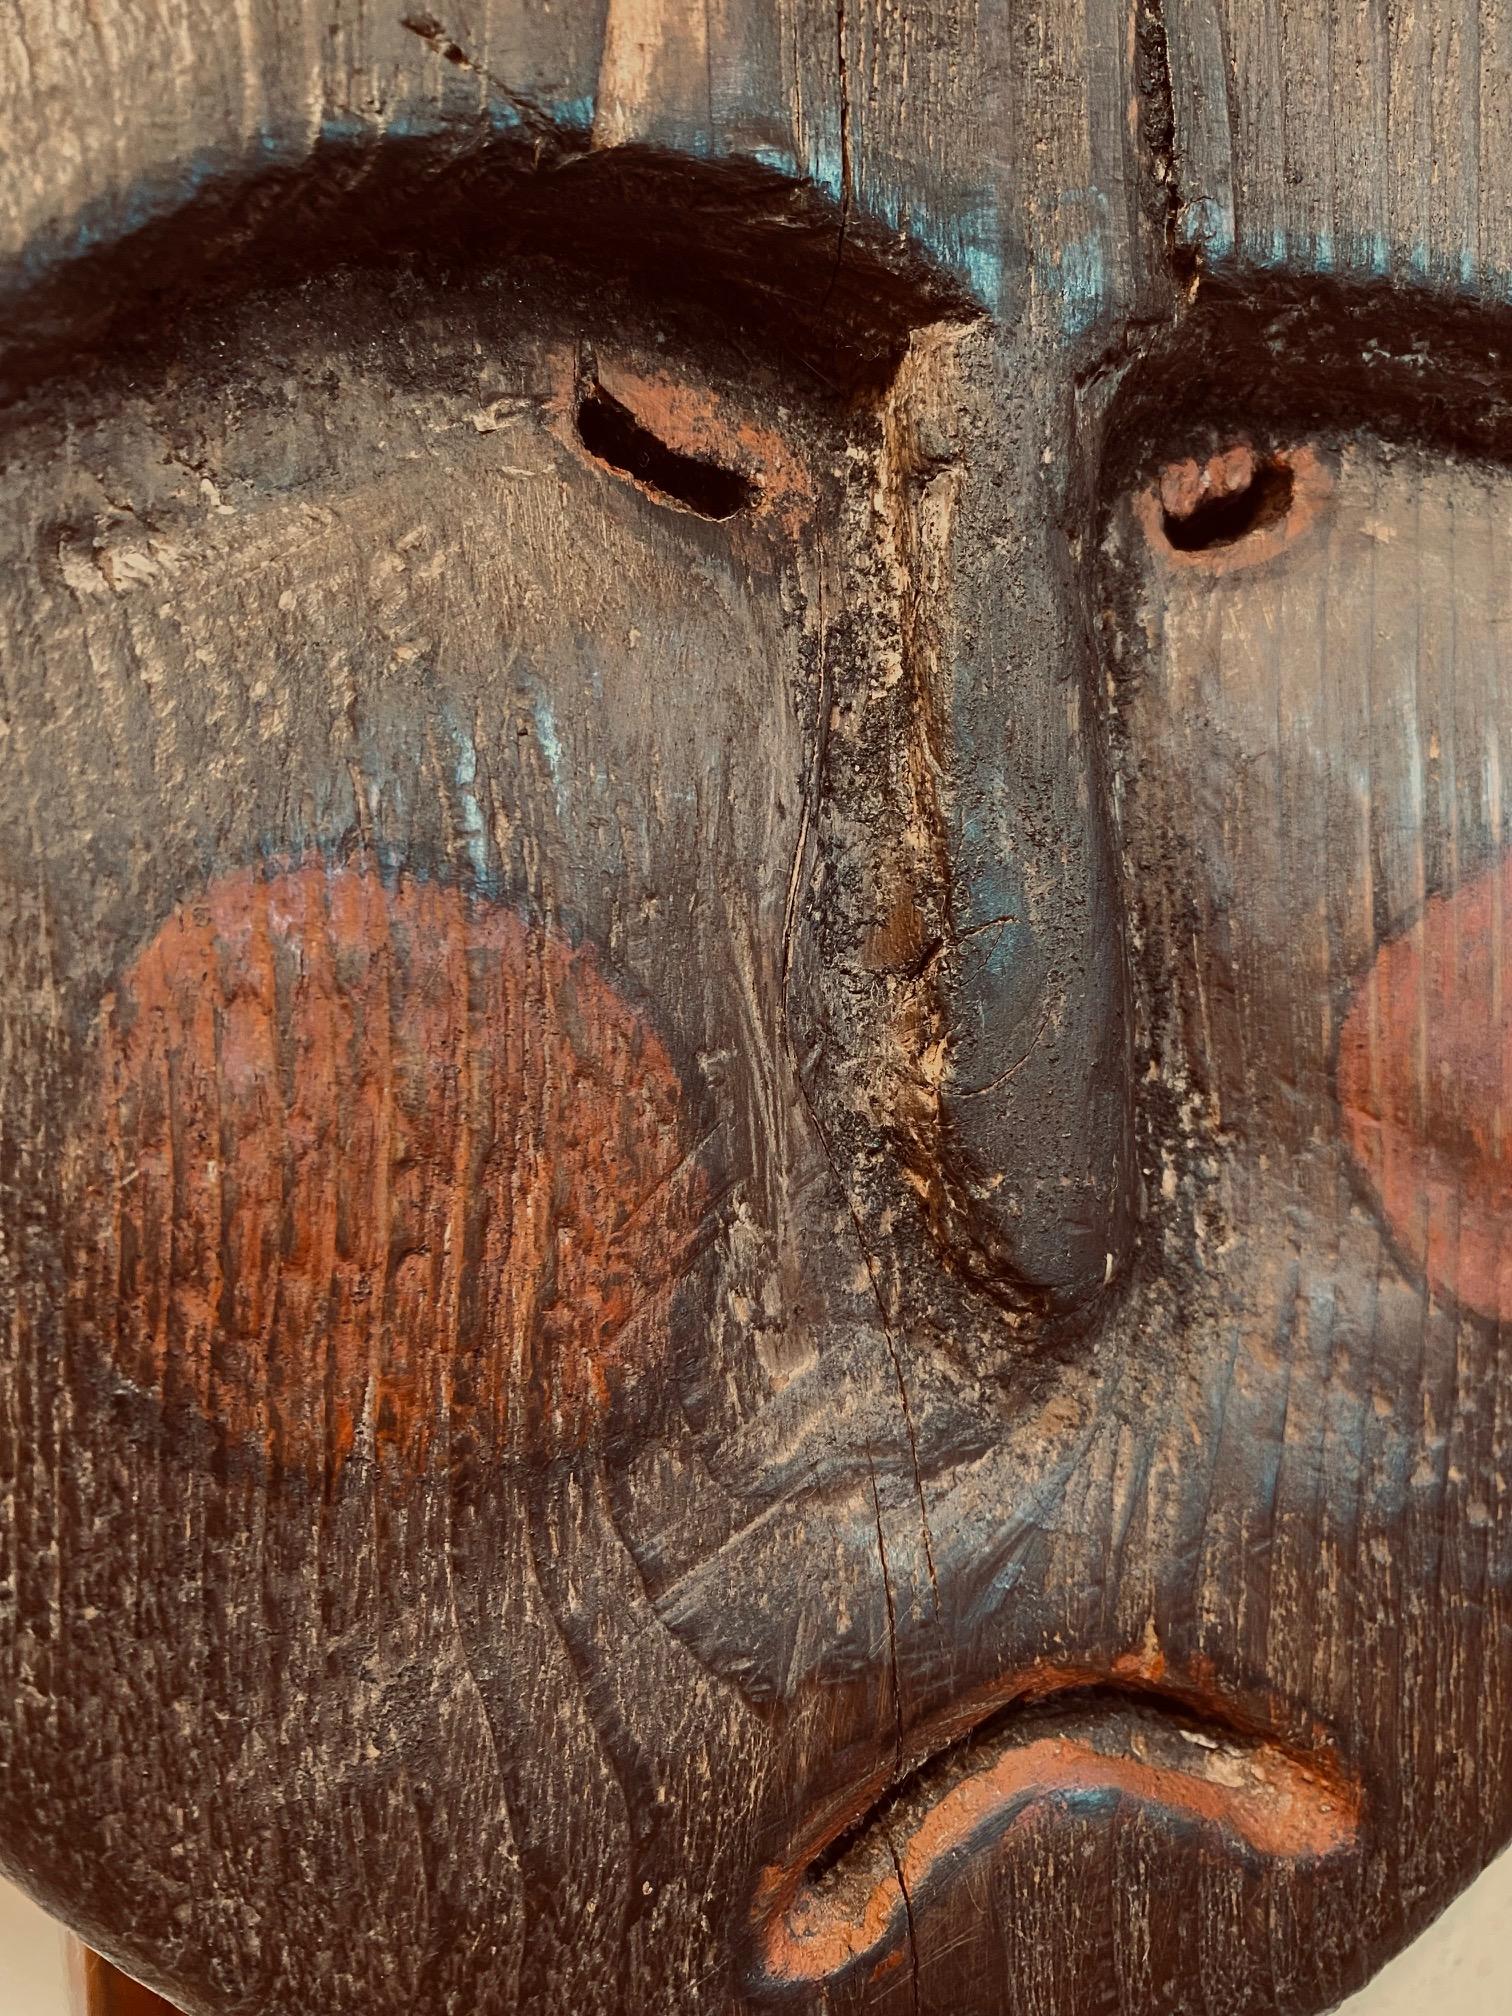 Antique Pacific Northwest Coast Carved and Polychromed Wooden Mask, almost certainly Yup'ik, early 20th Century, an oval wooden face with recess carved eyes and cheeks, bas relief nose, incised open mouth and pierced eyes, in original weathered